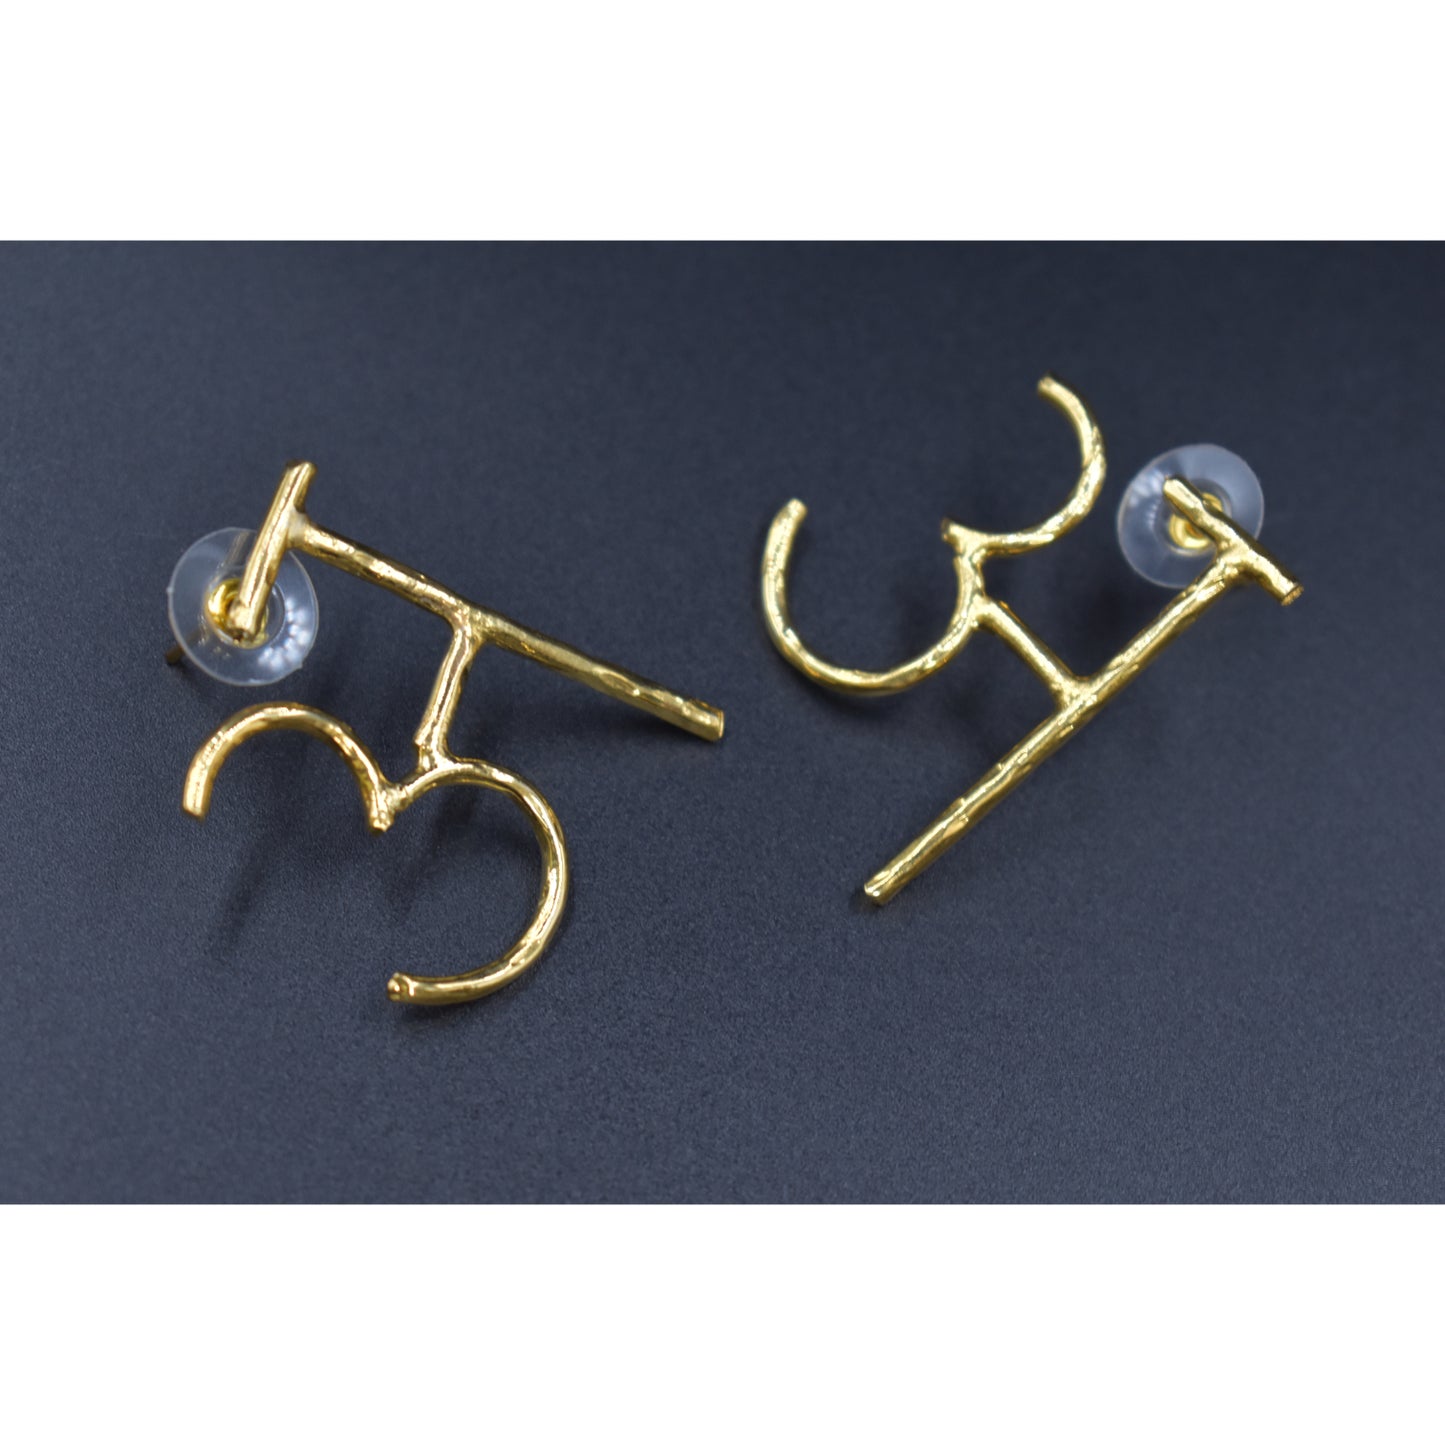 A pair of premium quality plating word earing